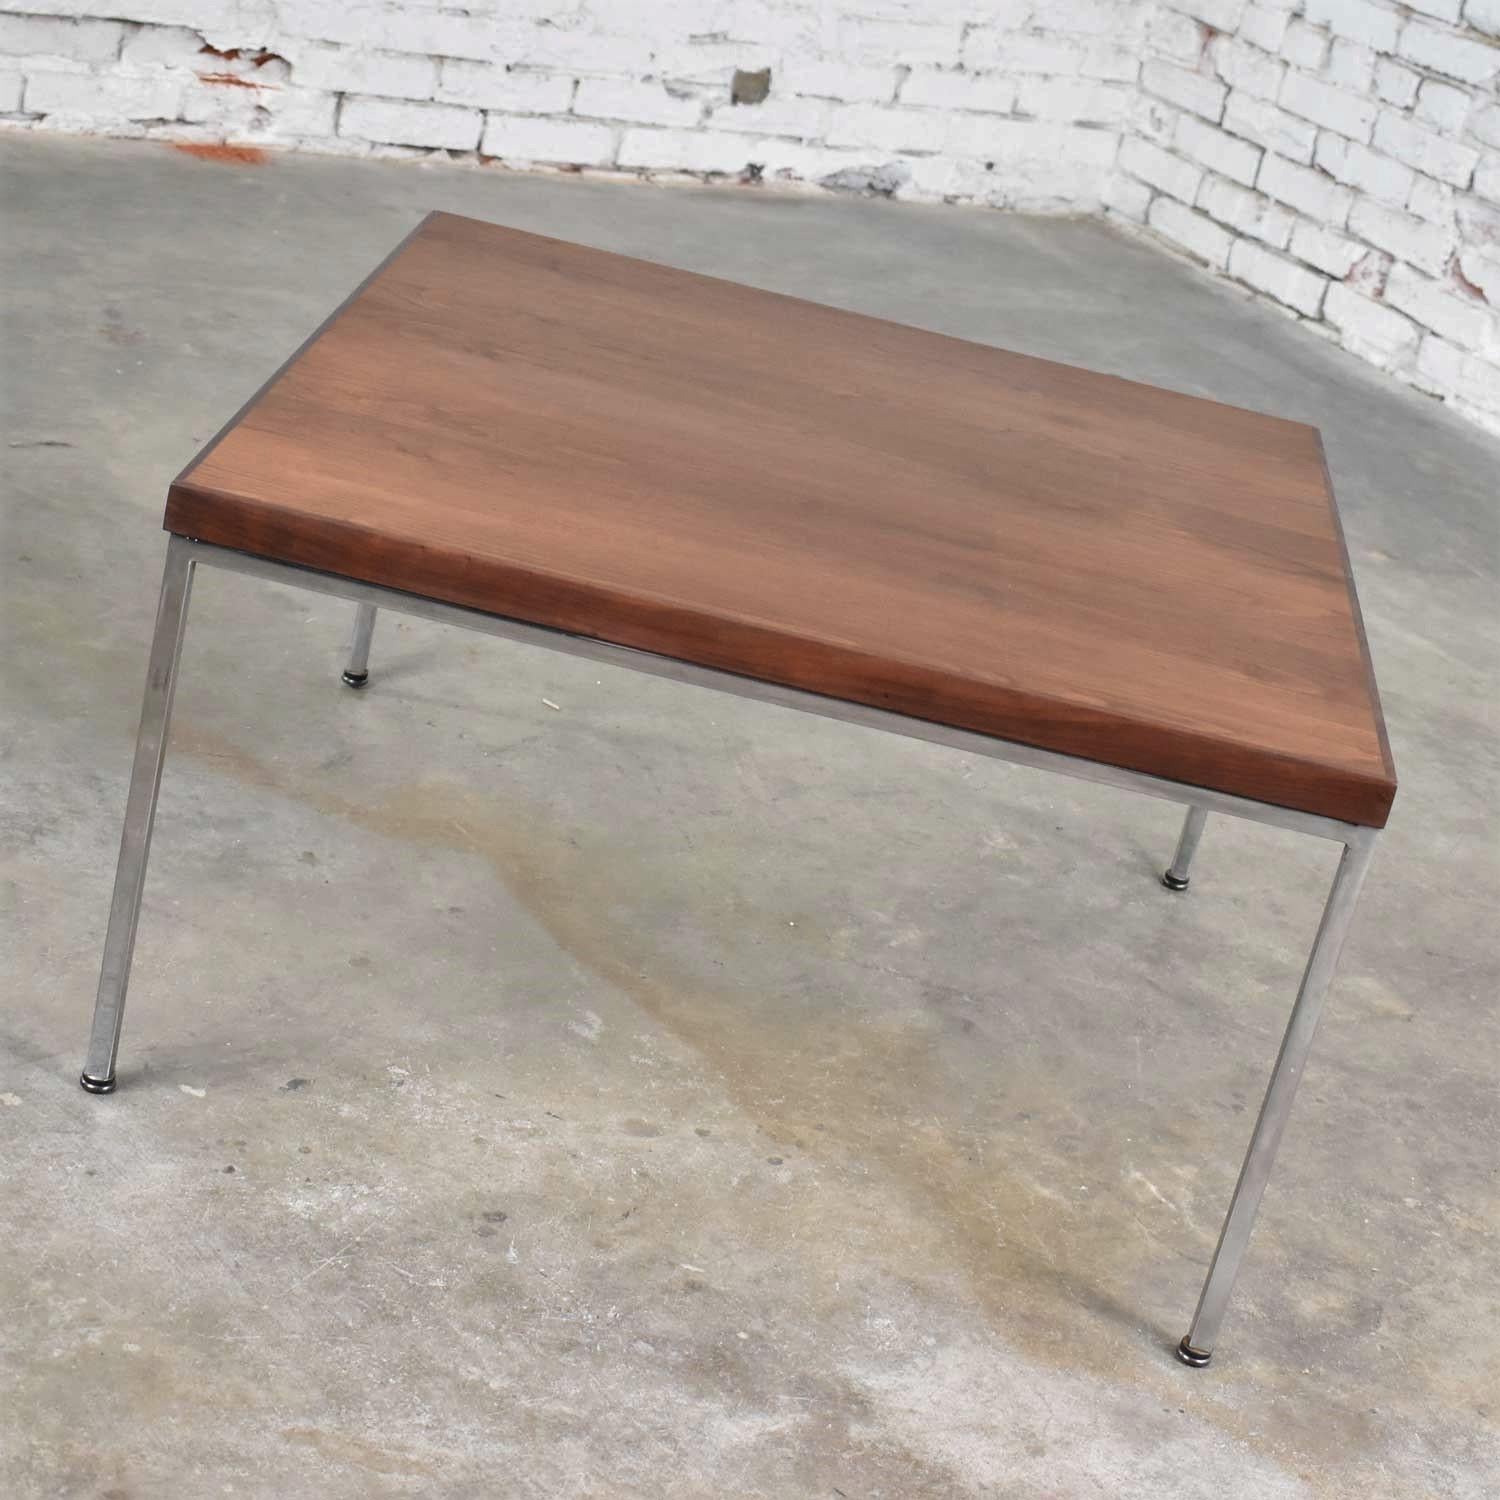 Handsome Mid-Century Modern end table or coffee table in walnut and chrome made in the style of Florence Knoll. It is in fabulous vintage condition with normal wear. The top has been restored; however, there are still visible signs of age and